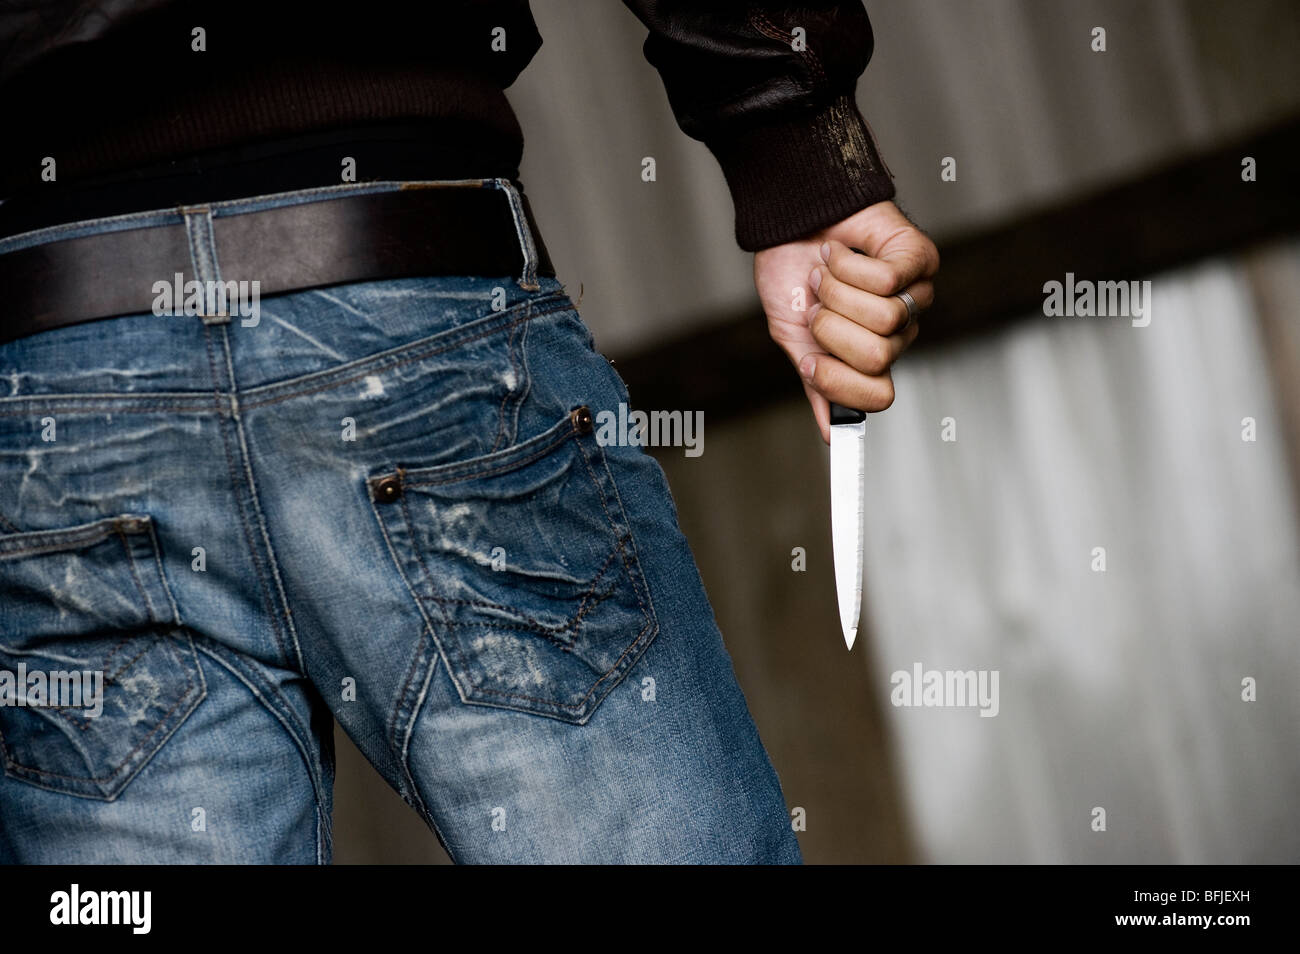 Rear view of a man carrying a knife. Stock Photo